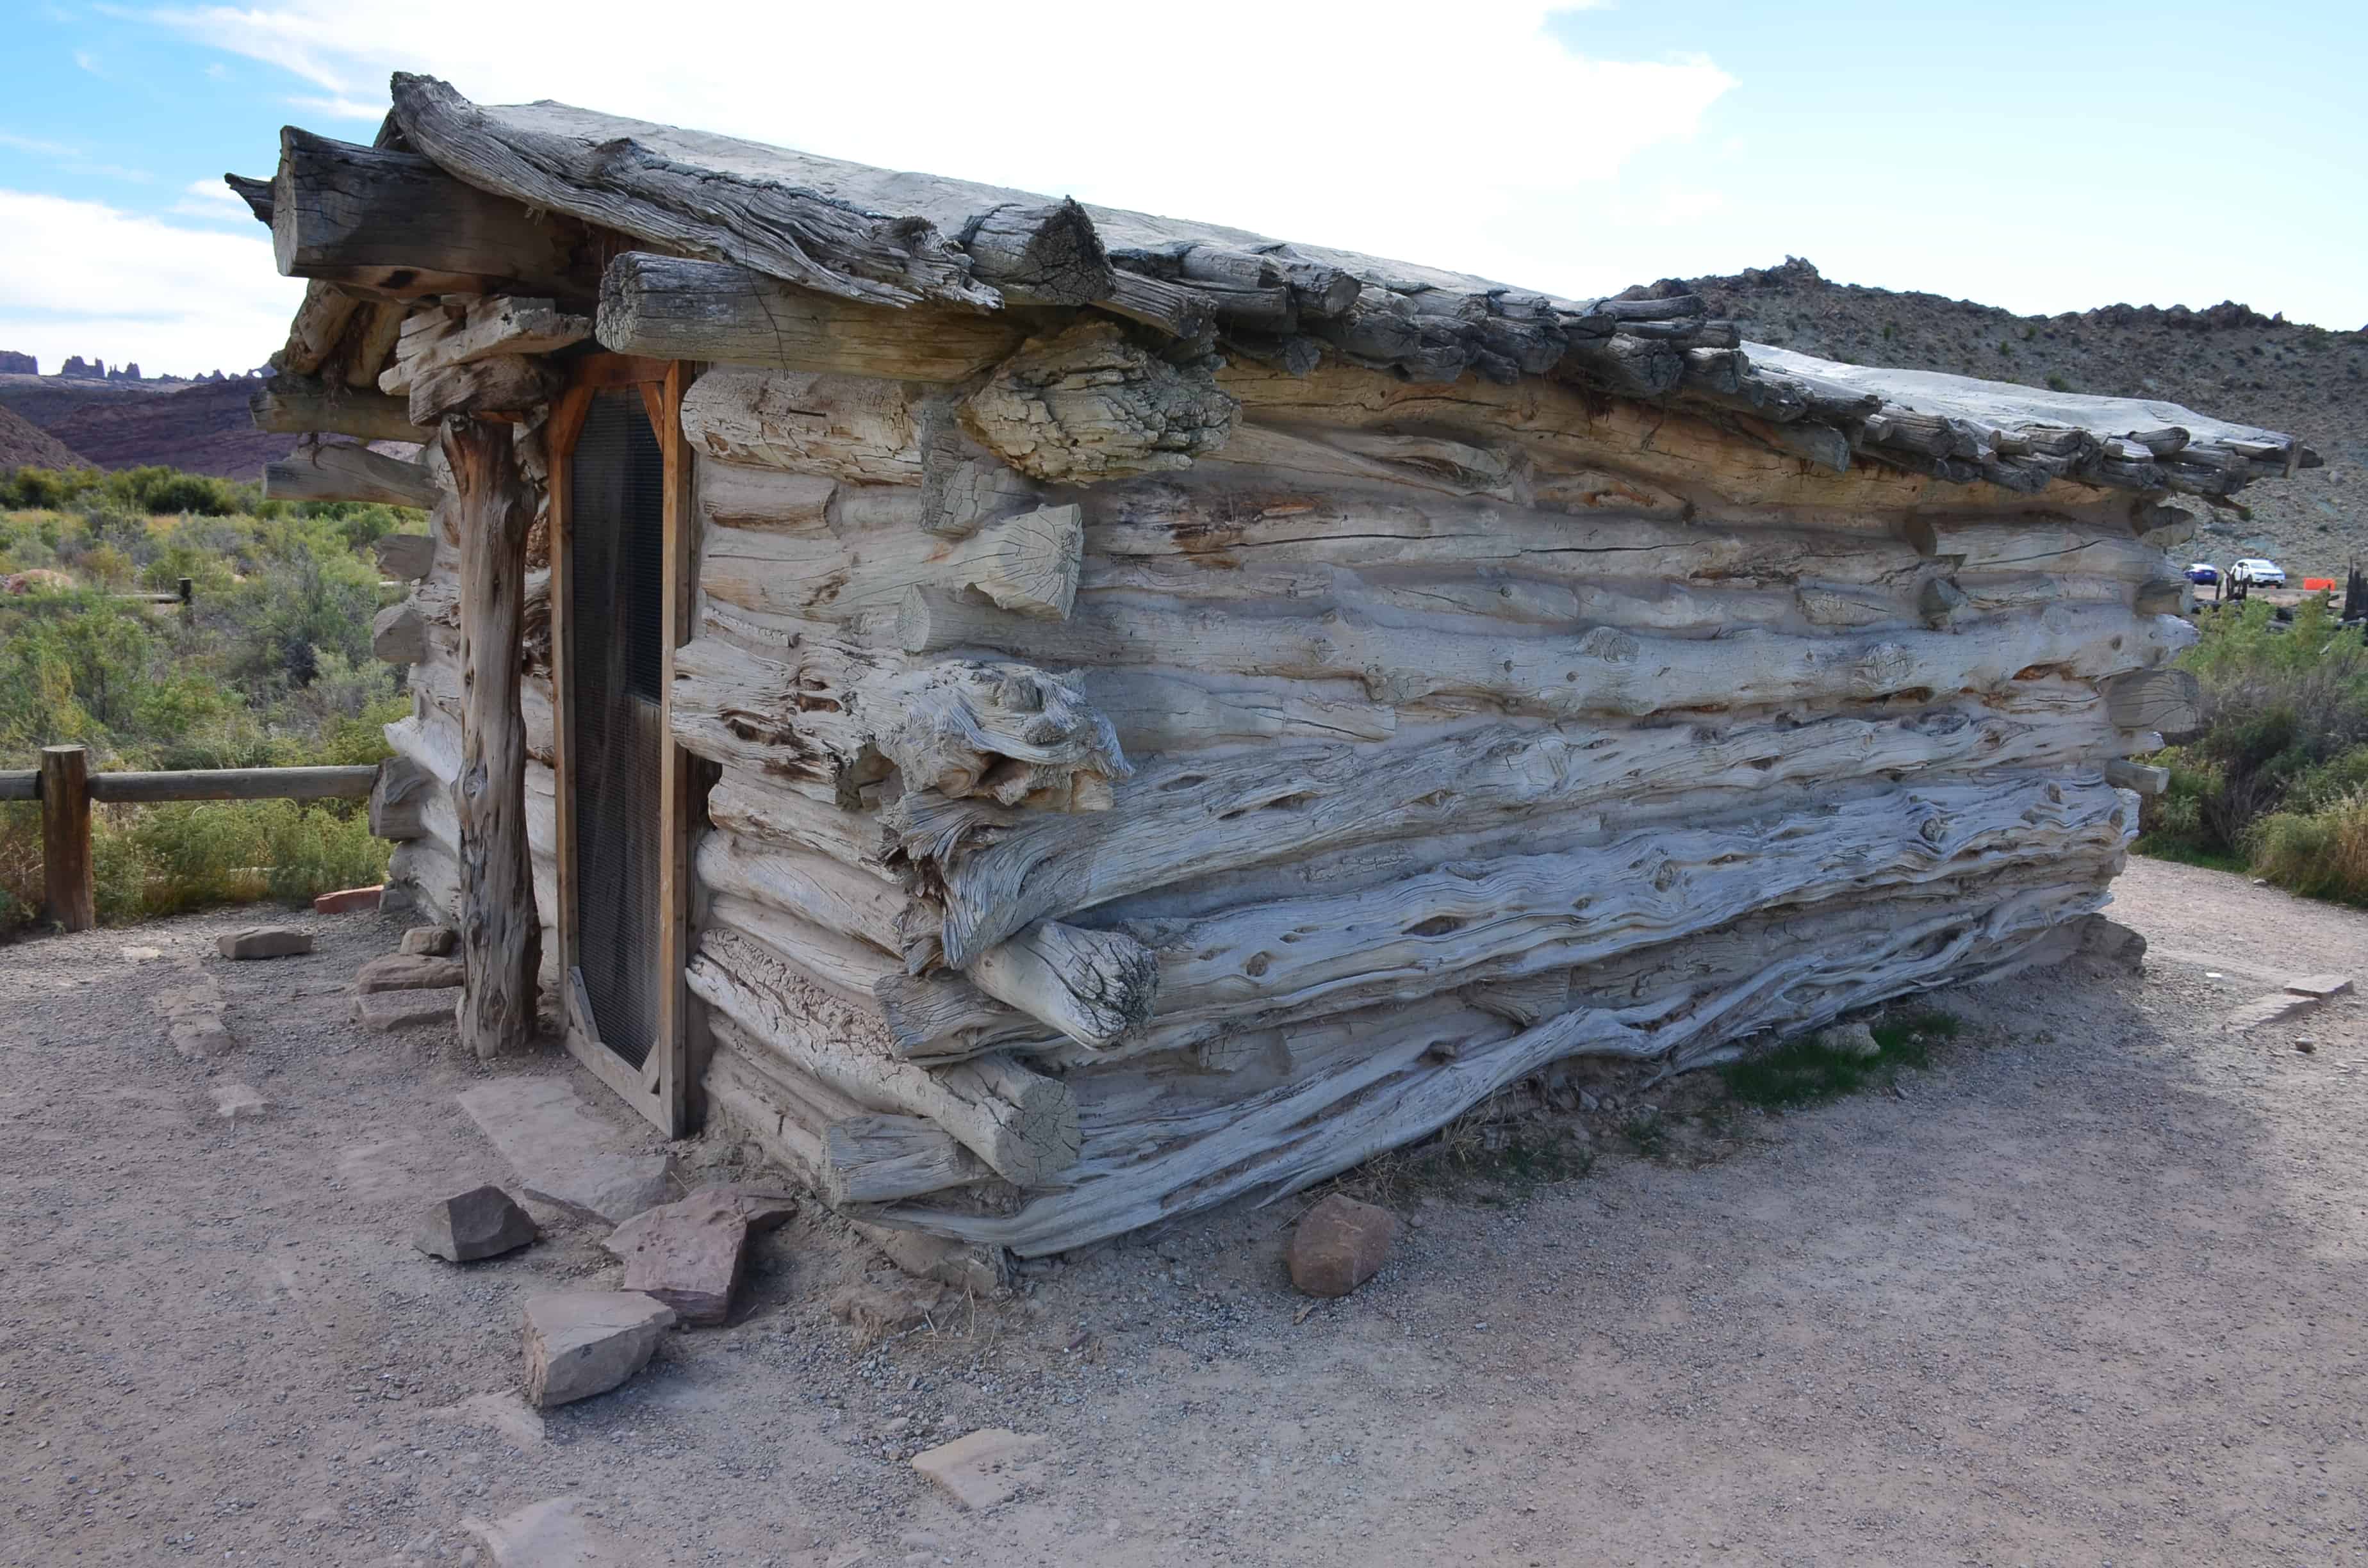 Second cabin at Wolfe Ranch at Arches National Park in Utah